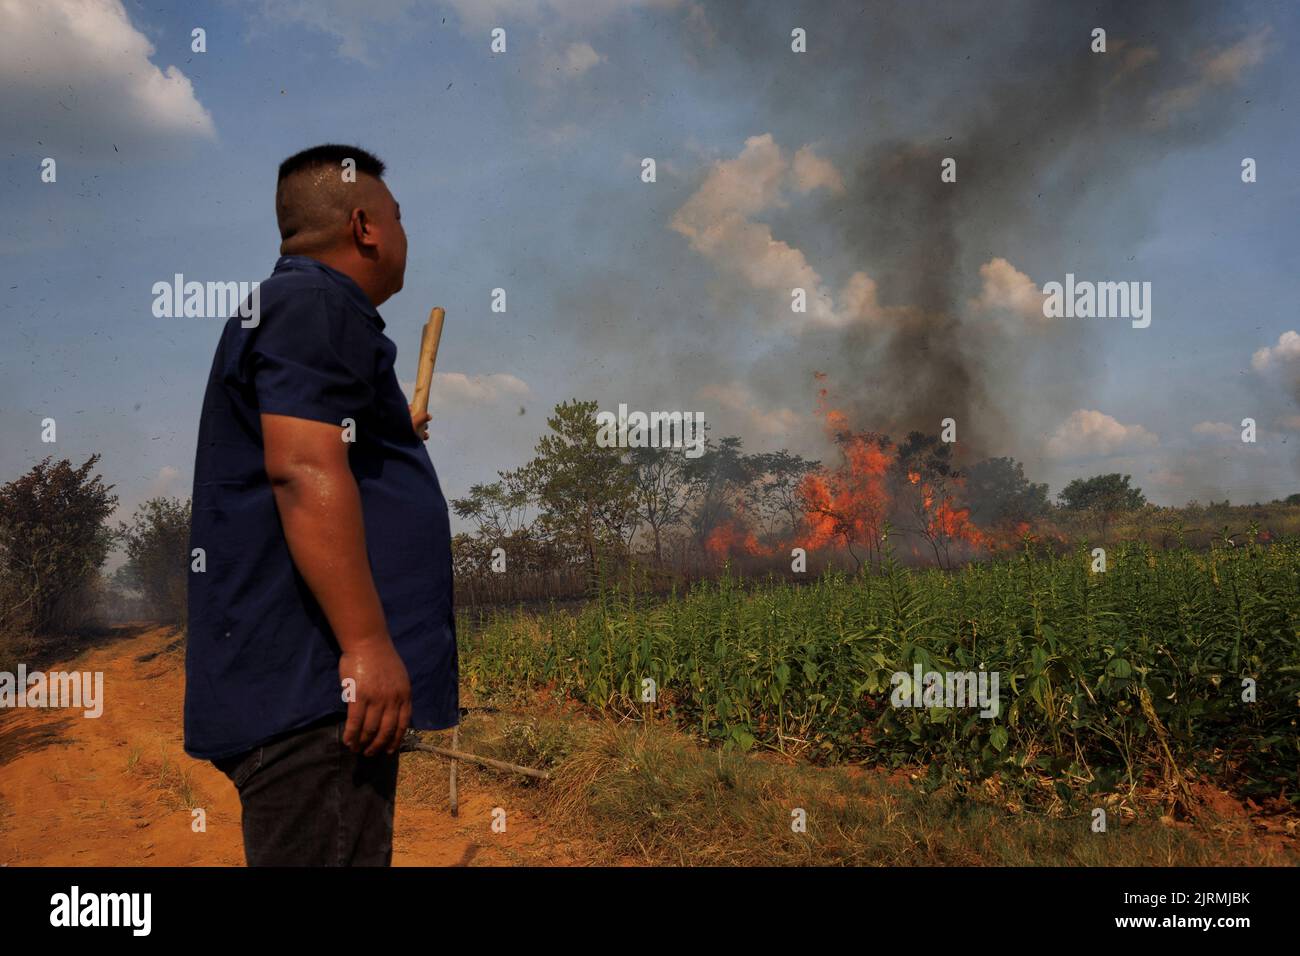 A villager looks at a brush fire that rages near fields during a drought in Xinyao village, Nanchang city, Jiangxi province, China, August 25, 2022.  REUTERS/Thomas Peter Stock Photo